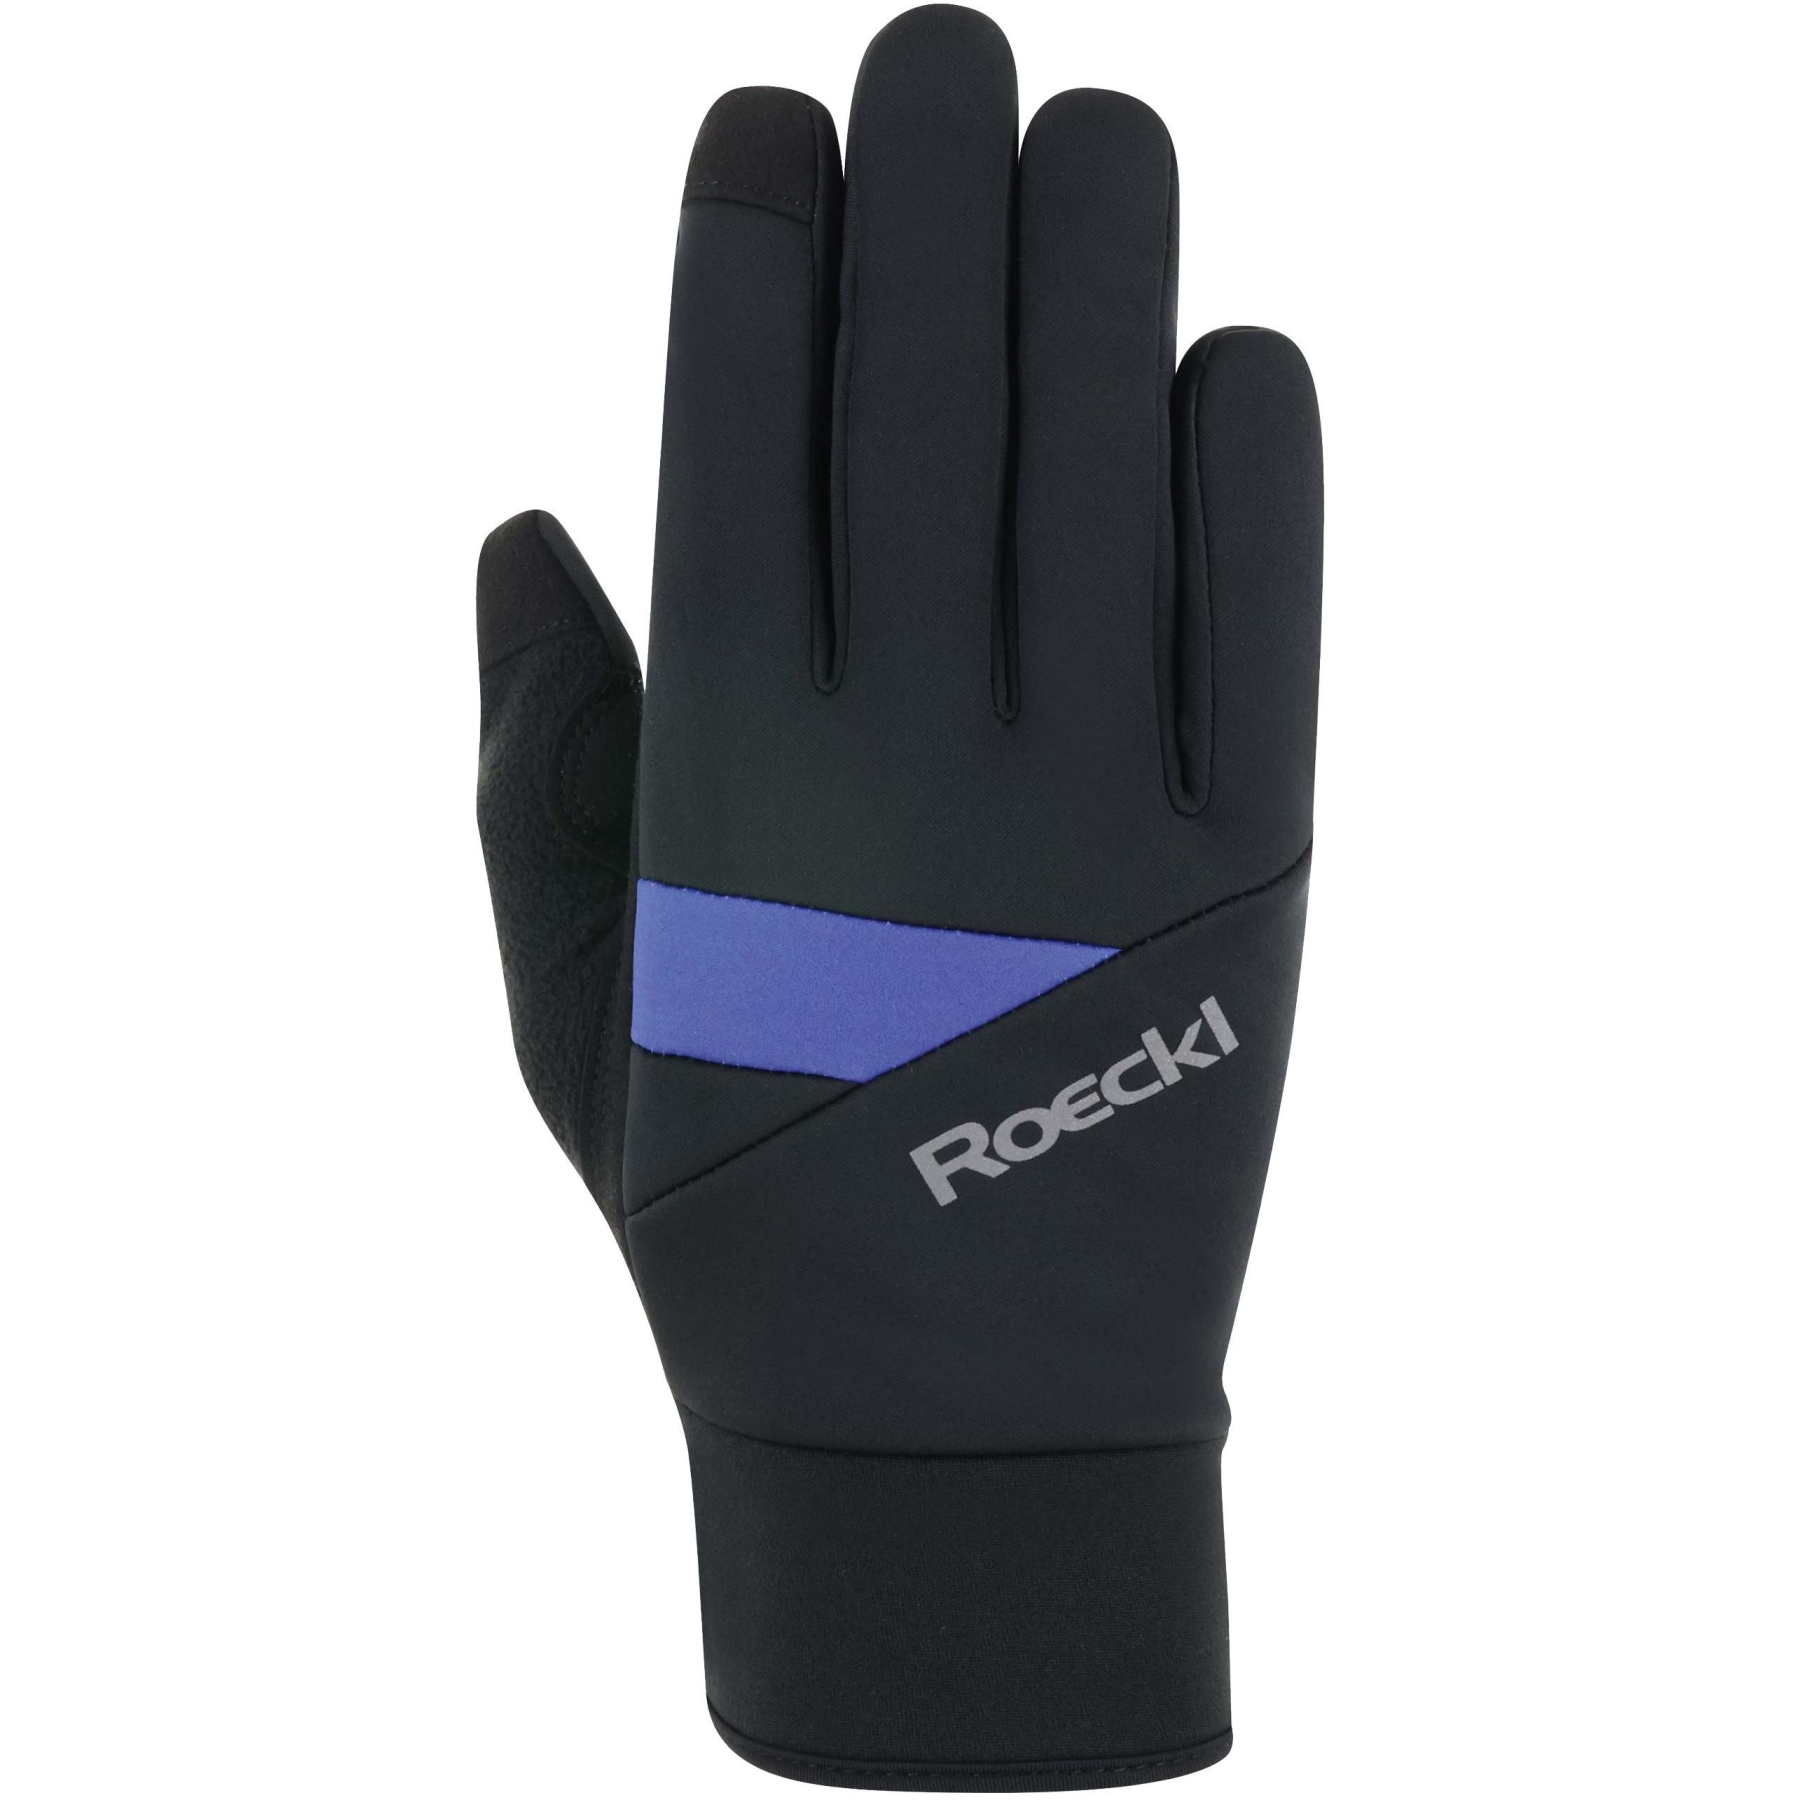 Picture of Roeckl Sports Reichenthal Juniors Cycling Gloves - black/dazzling blue 9511